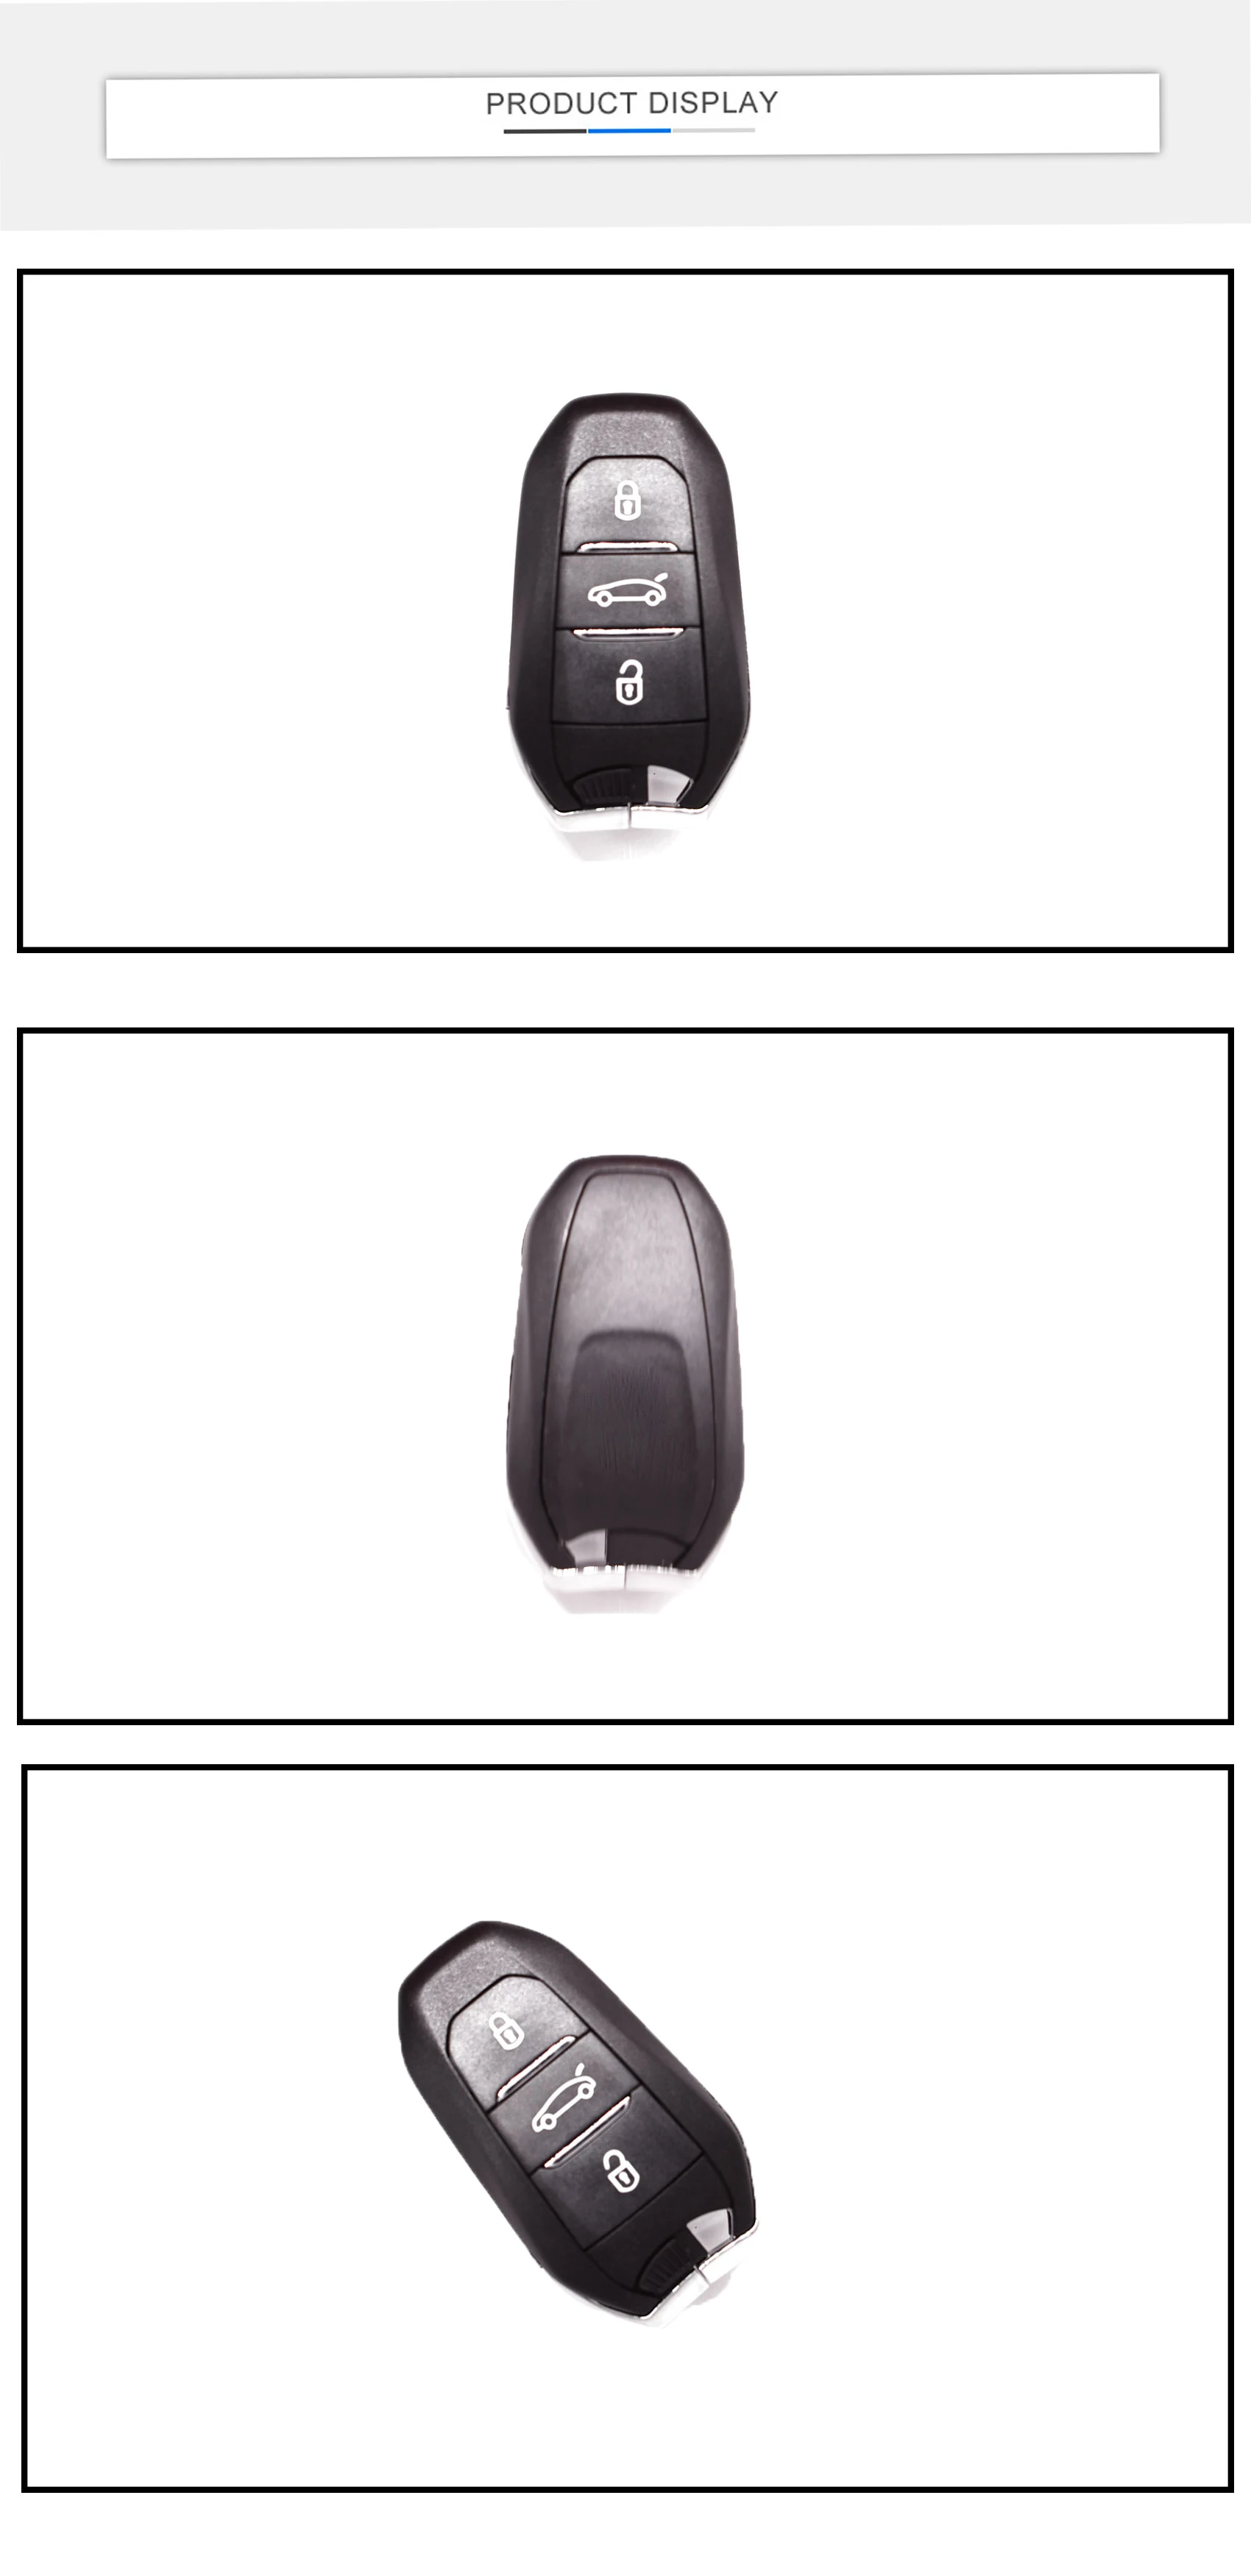 Hot-selling New Keyless Remote Car Smart Key Fob with 3buttons 433MHz 4A chip fit for Peugeot